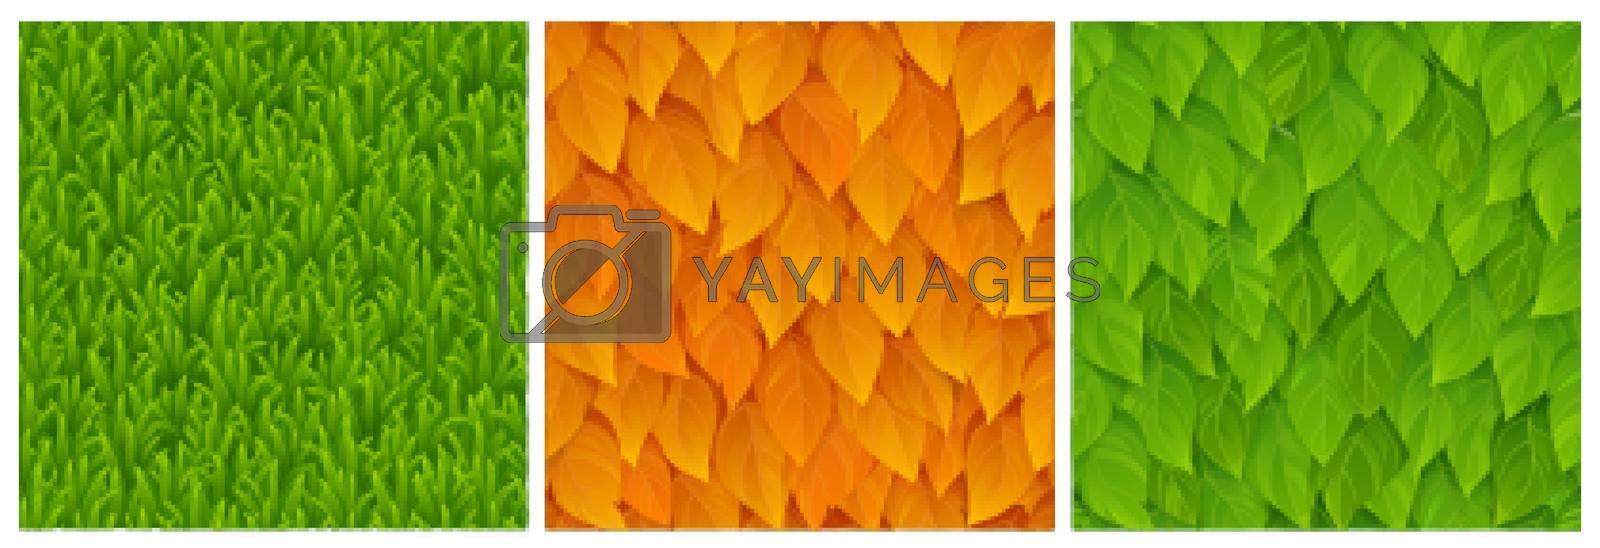 Royalty free image of Textures of grass, green and orange tree leaves by vectorart